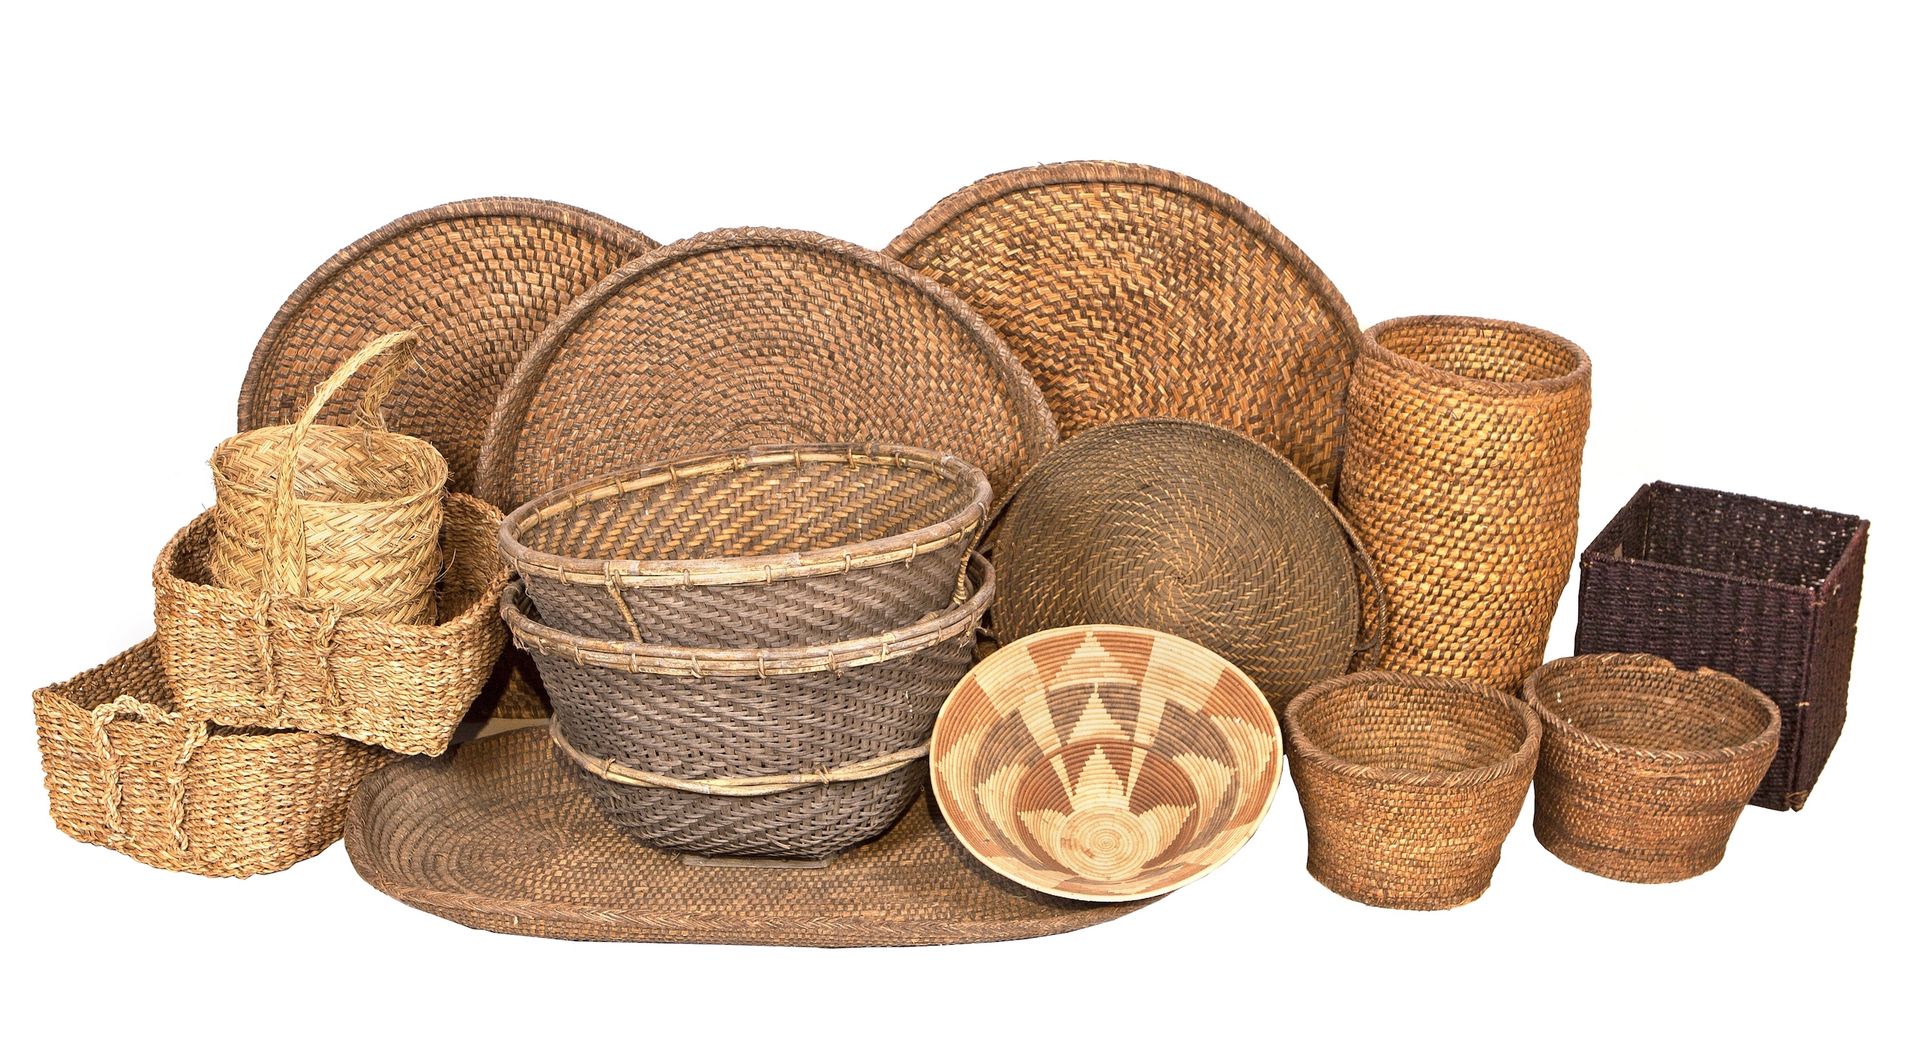 Null Set of wicker baskets and trays
15 pieces
72 cm diameter
150 - 200 €